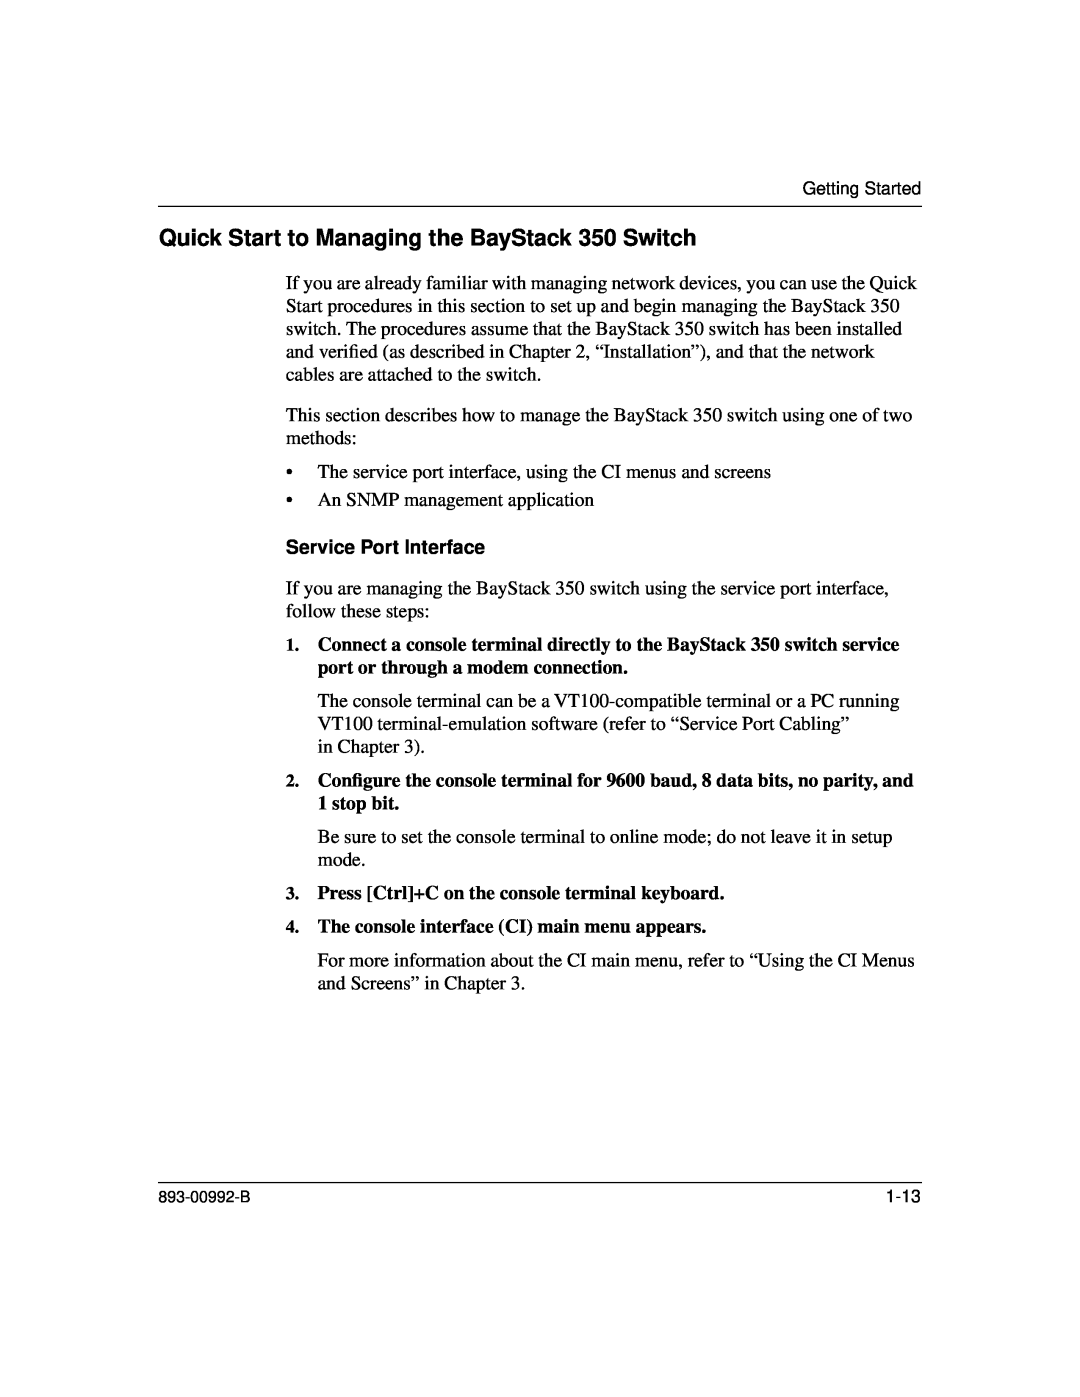 Bay Technical Associates manual Quick Start to Managing the BayStack 350 Switch, Service Port Interface 